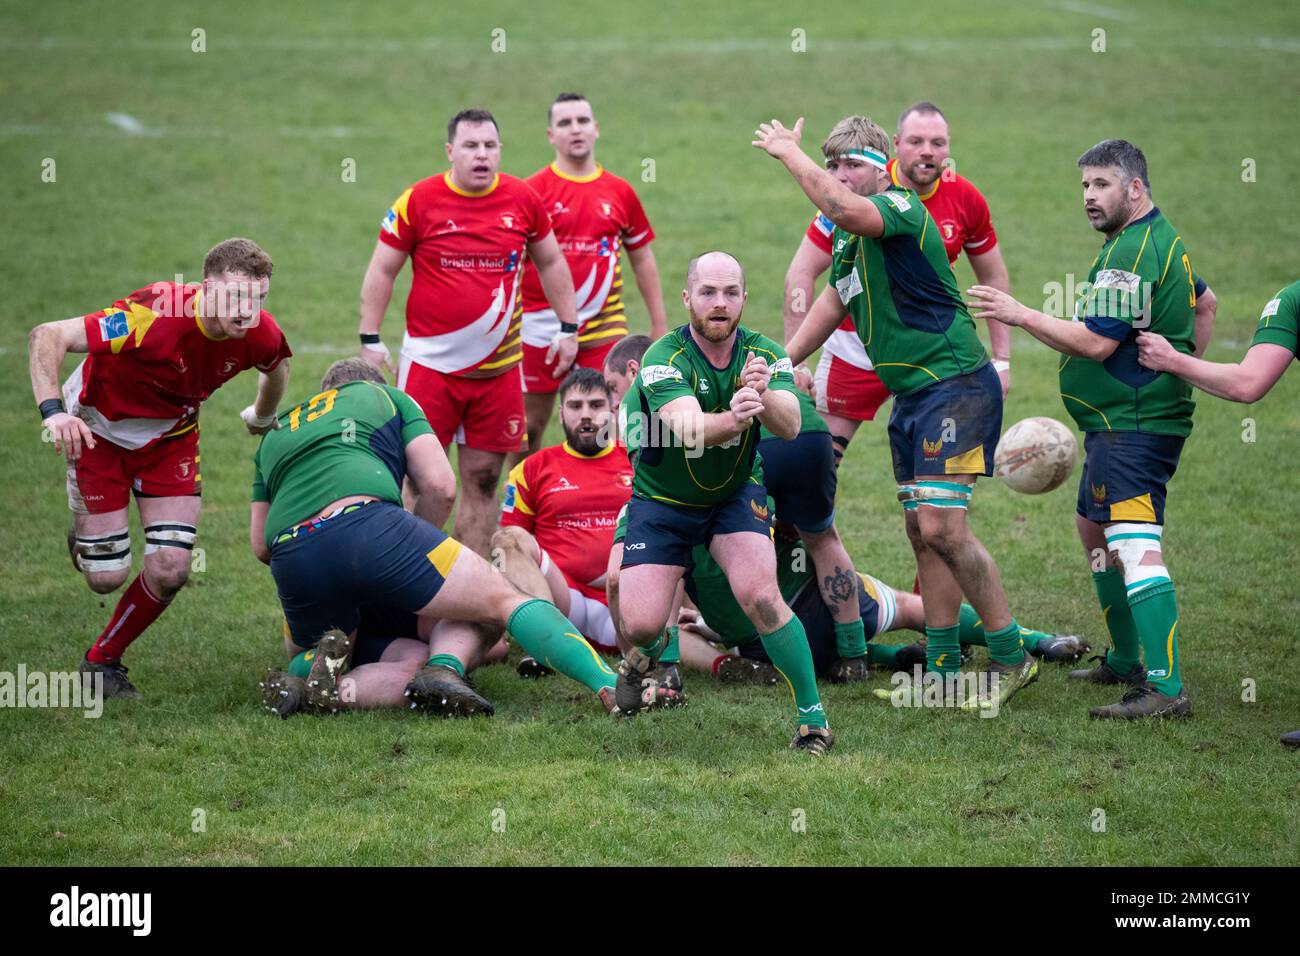 Rugby scrum half passing the ball. Stock Photo